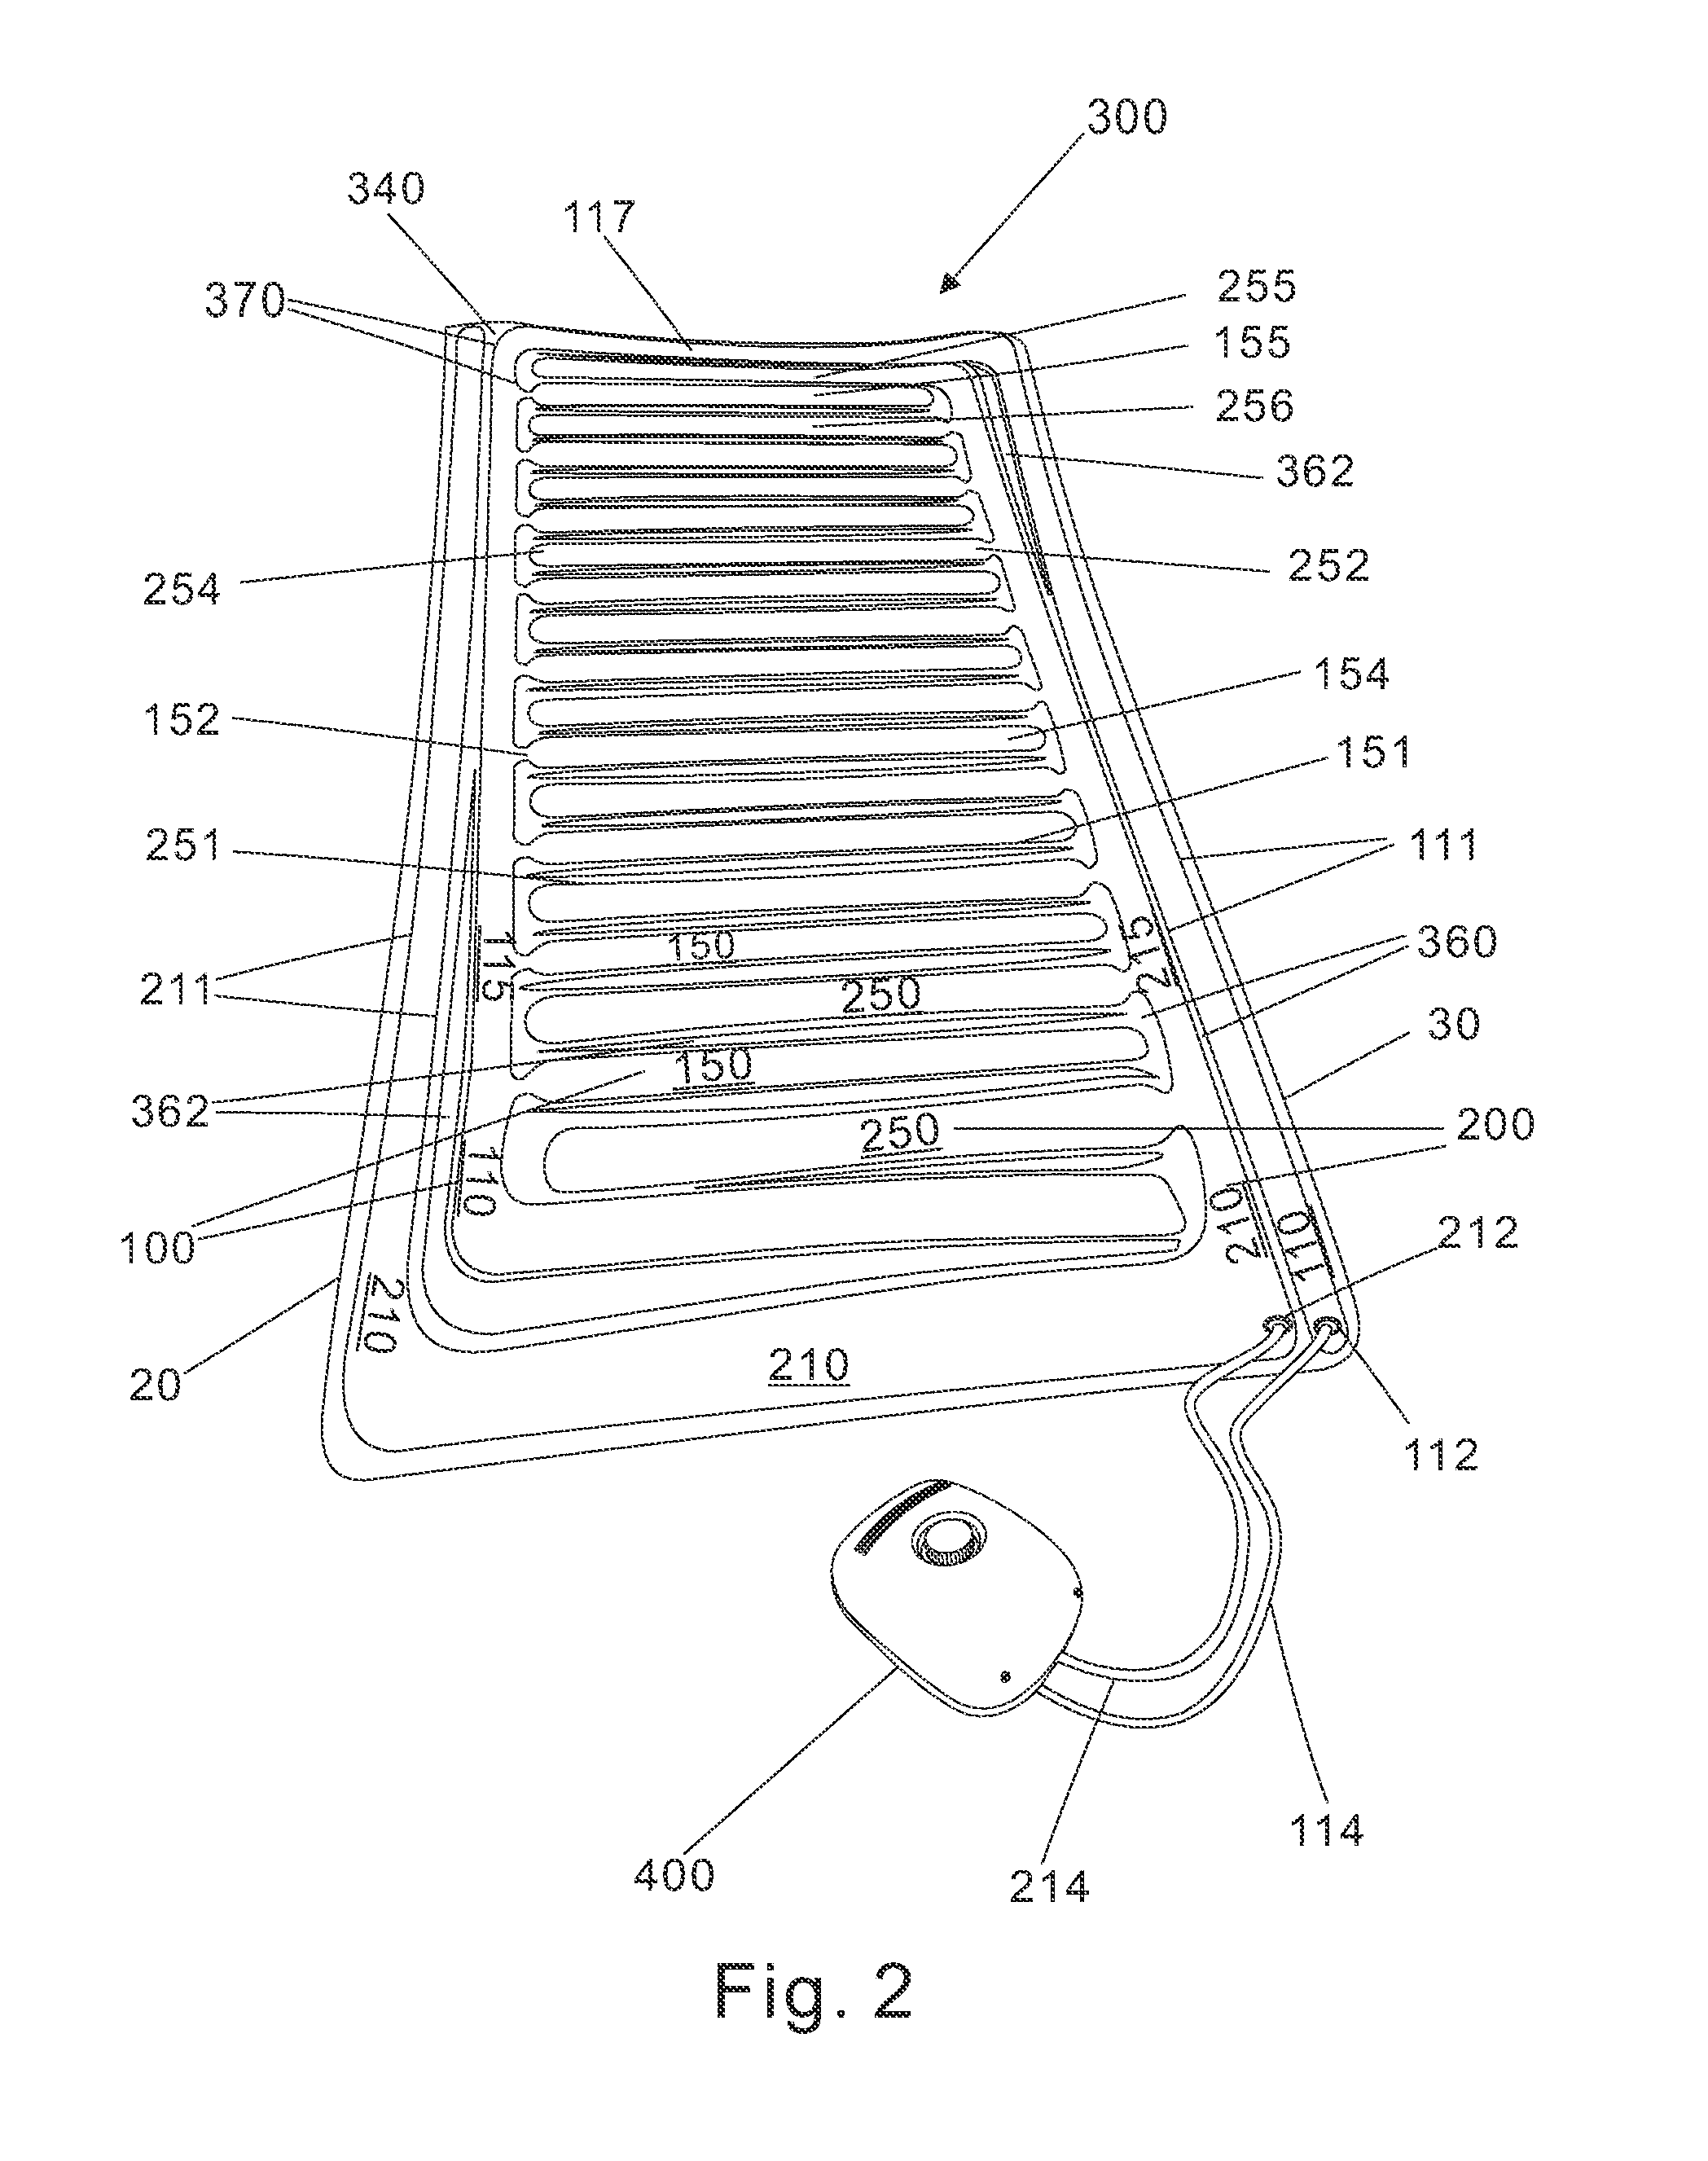 Air Cushion with Alternatively Inflated Chambers